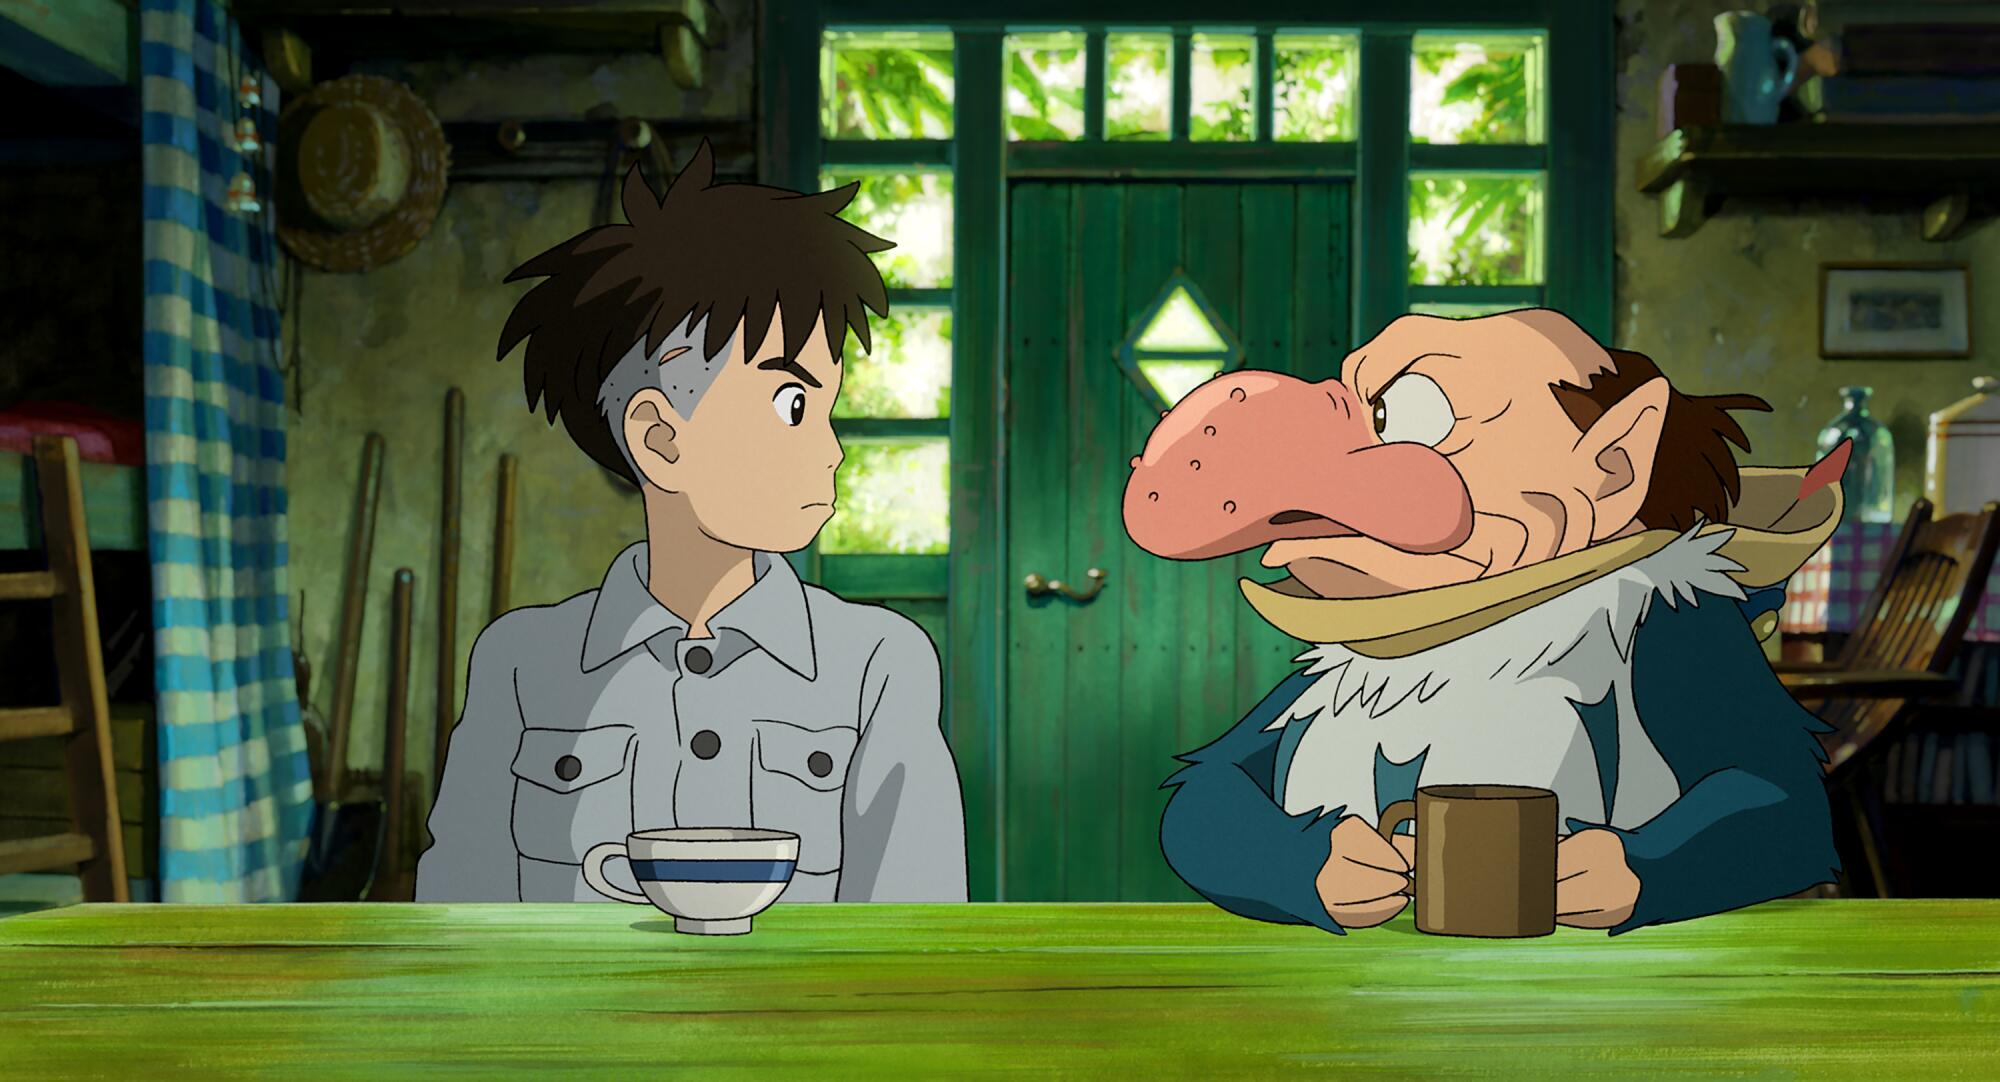 A young man has tea with a big-nosed creature in a heron costume.